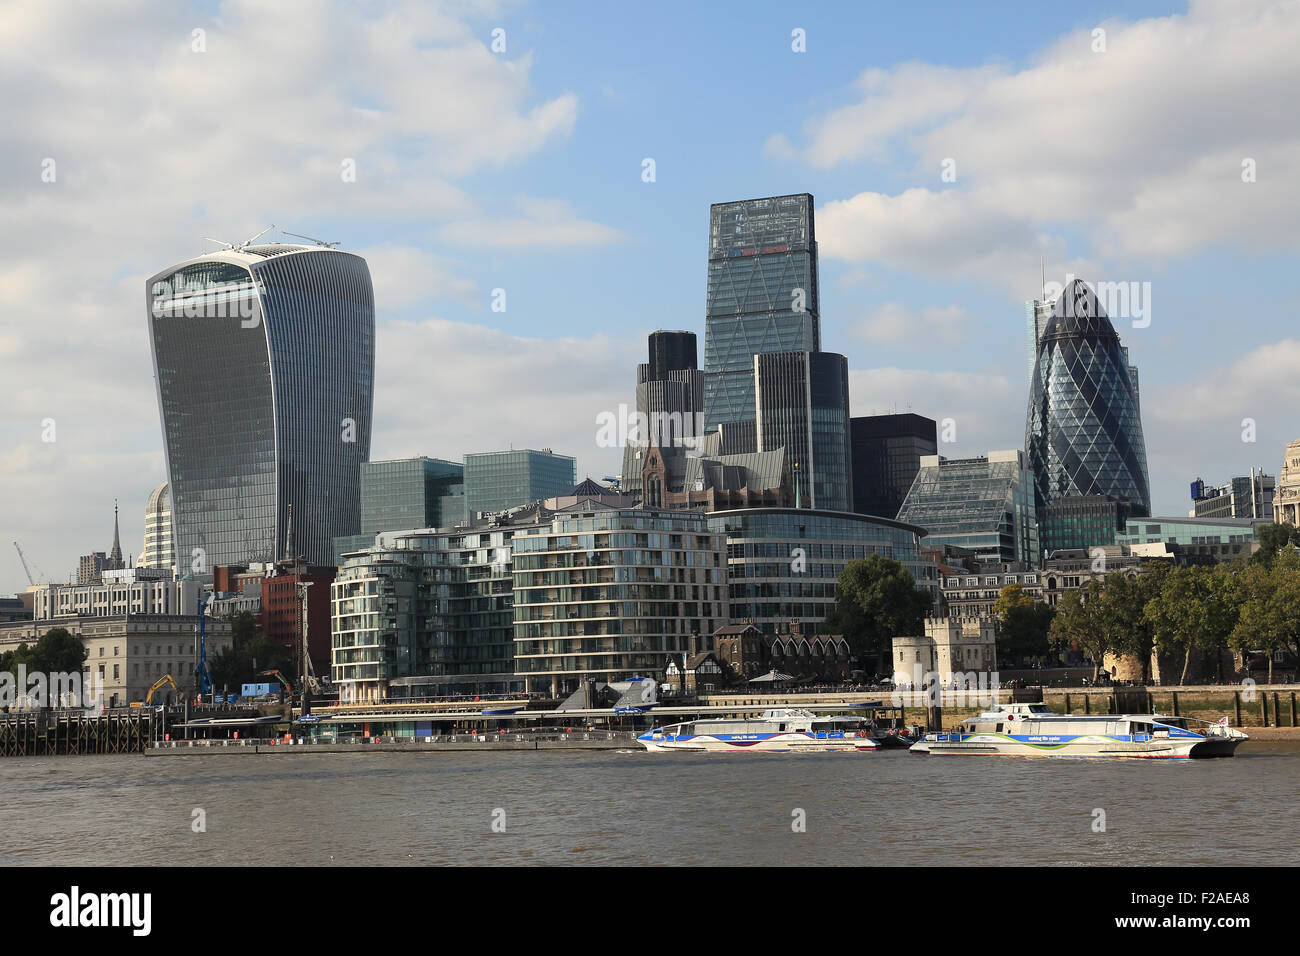 Modern architecture in London, England, including the famous Gerkin, Walkie Talkie and Cheese Grater buildings Stock Photo